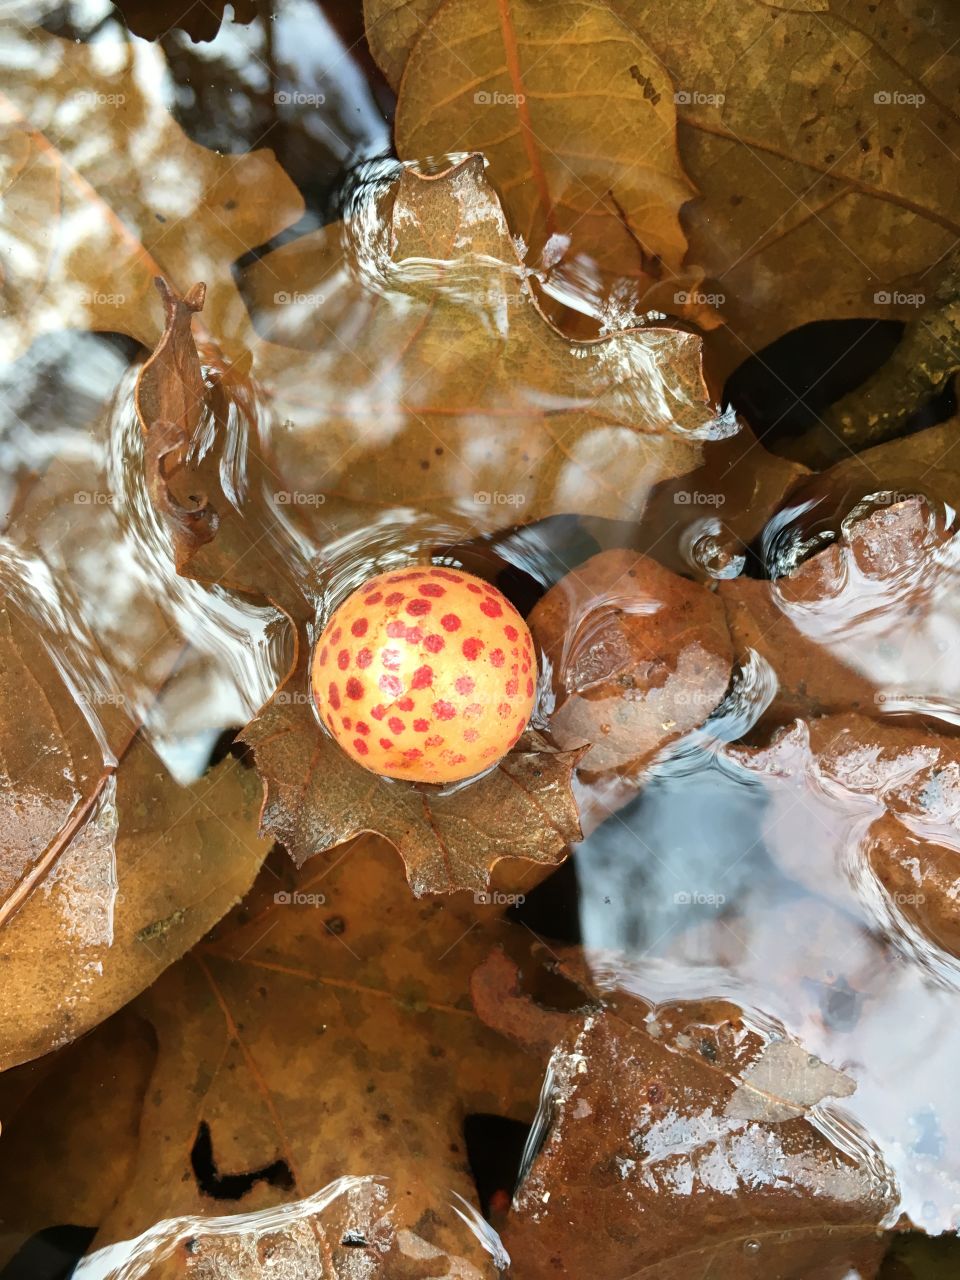 little spotted oak tree gall landed in a puddle